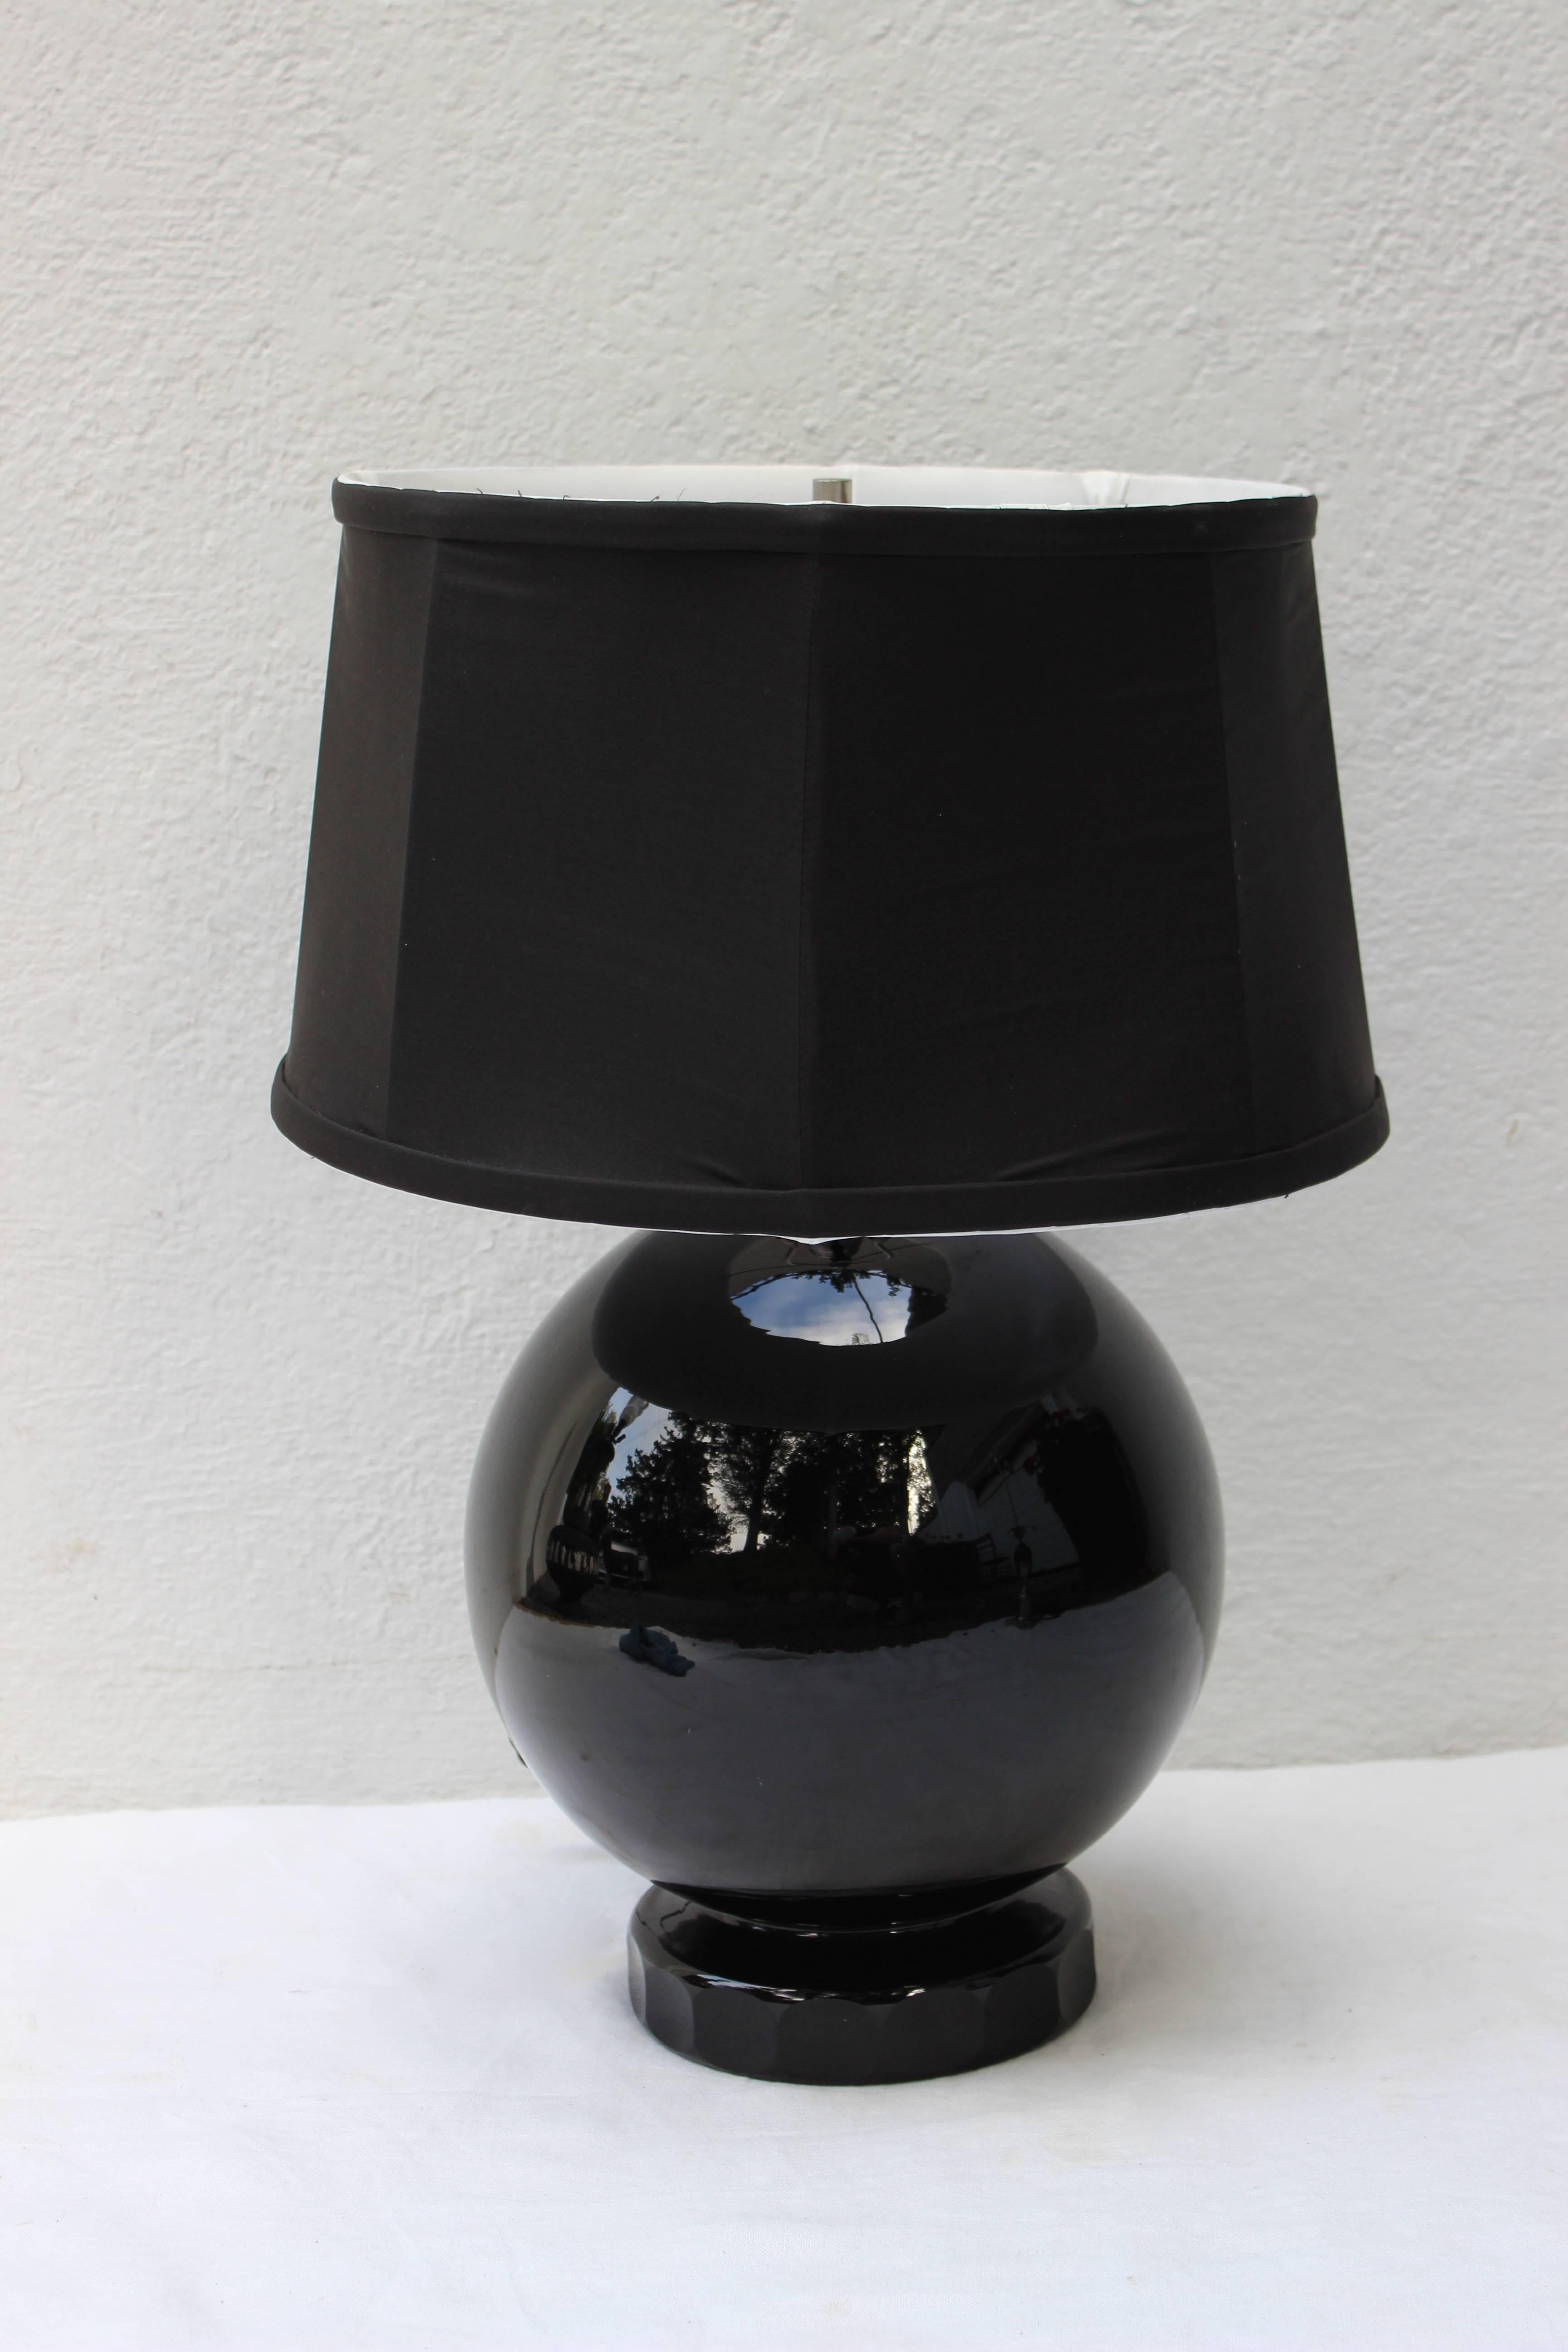 Beautiful lamp made of a sphere of black glass on a black glass base with a black silk shade and french wired......

Shade Measures 12.25